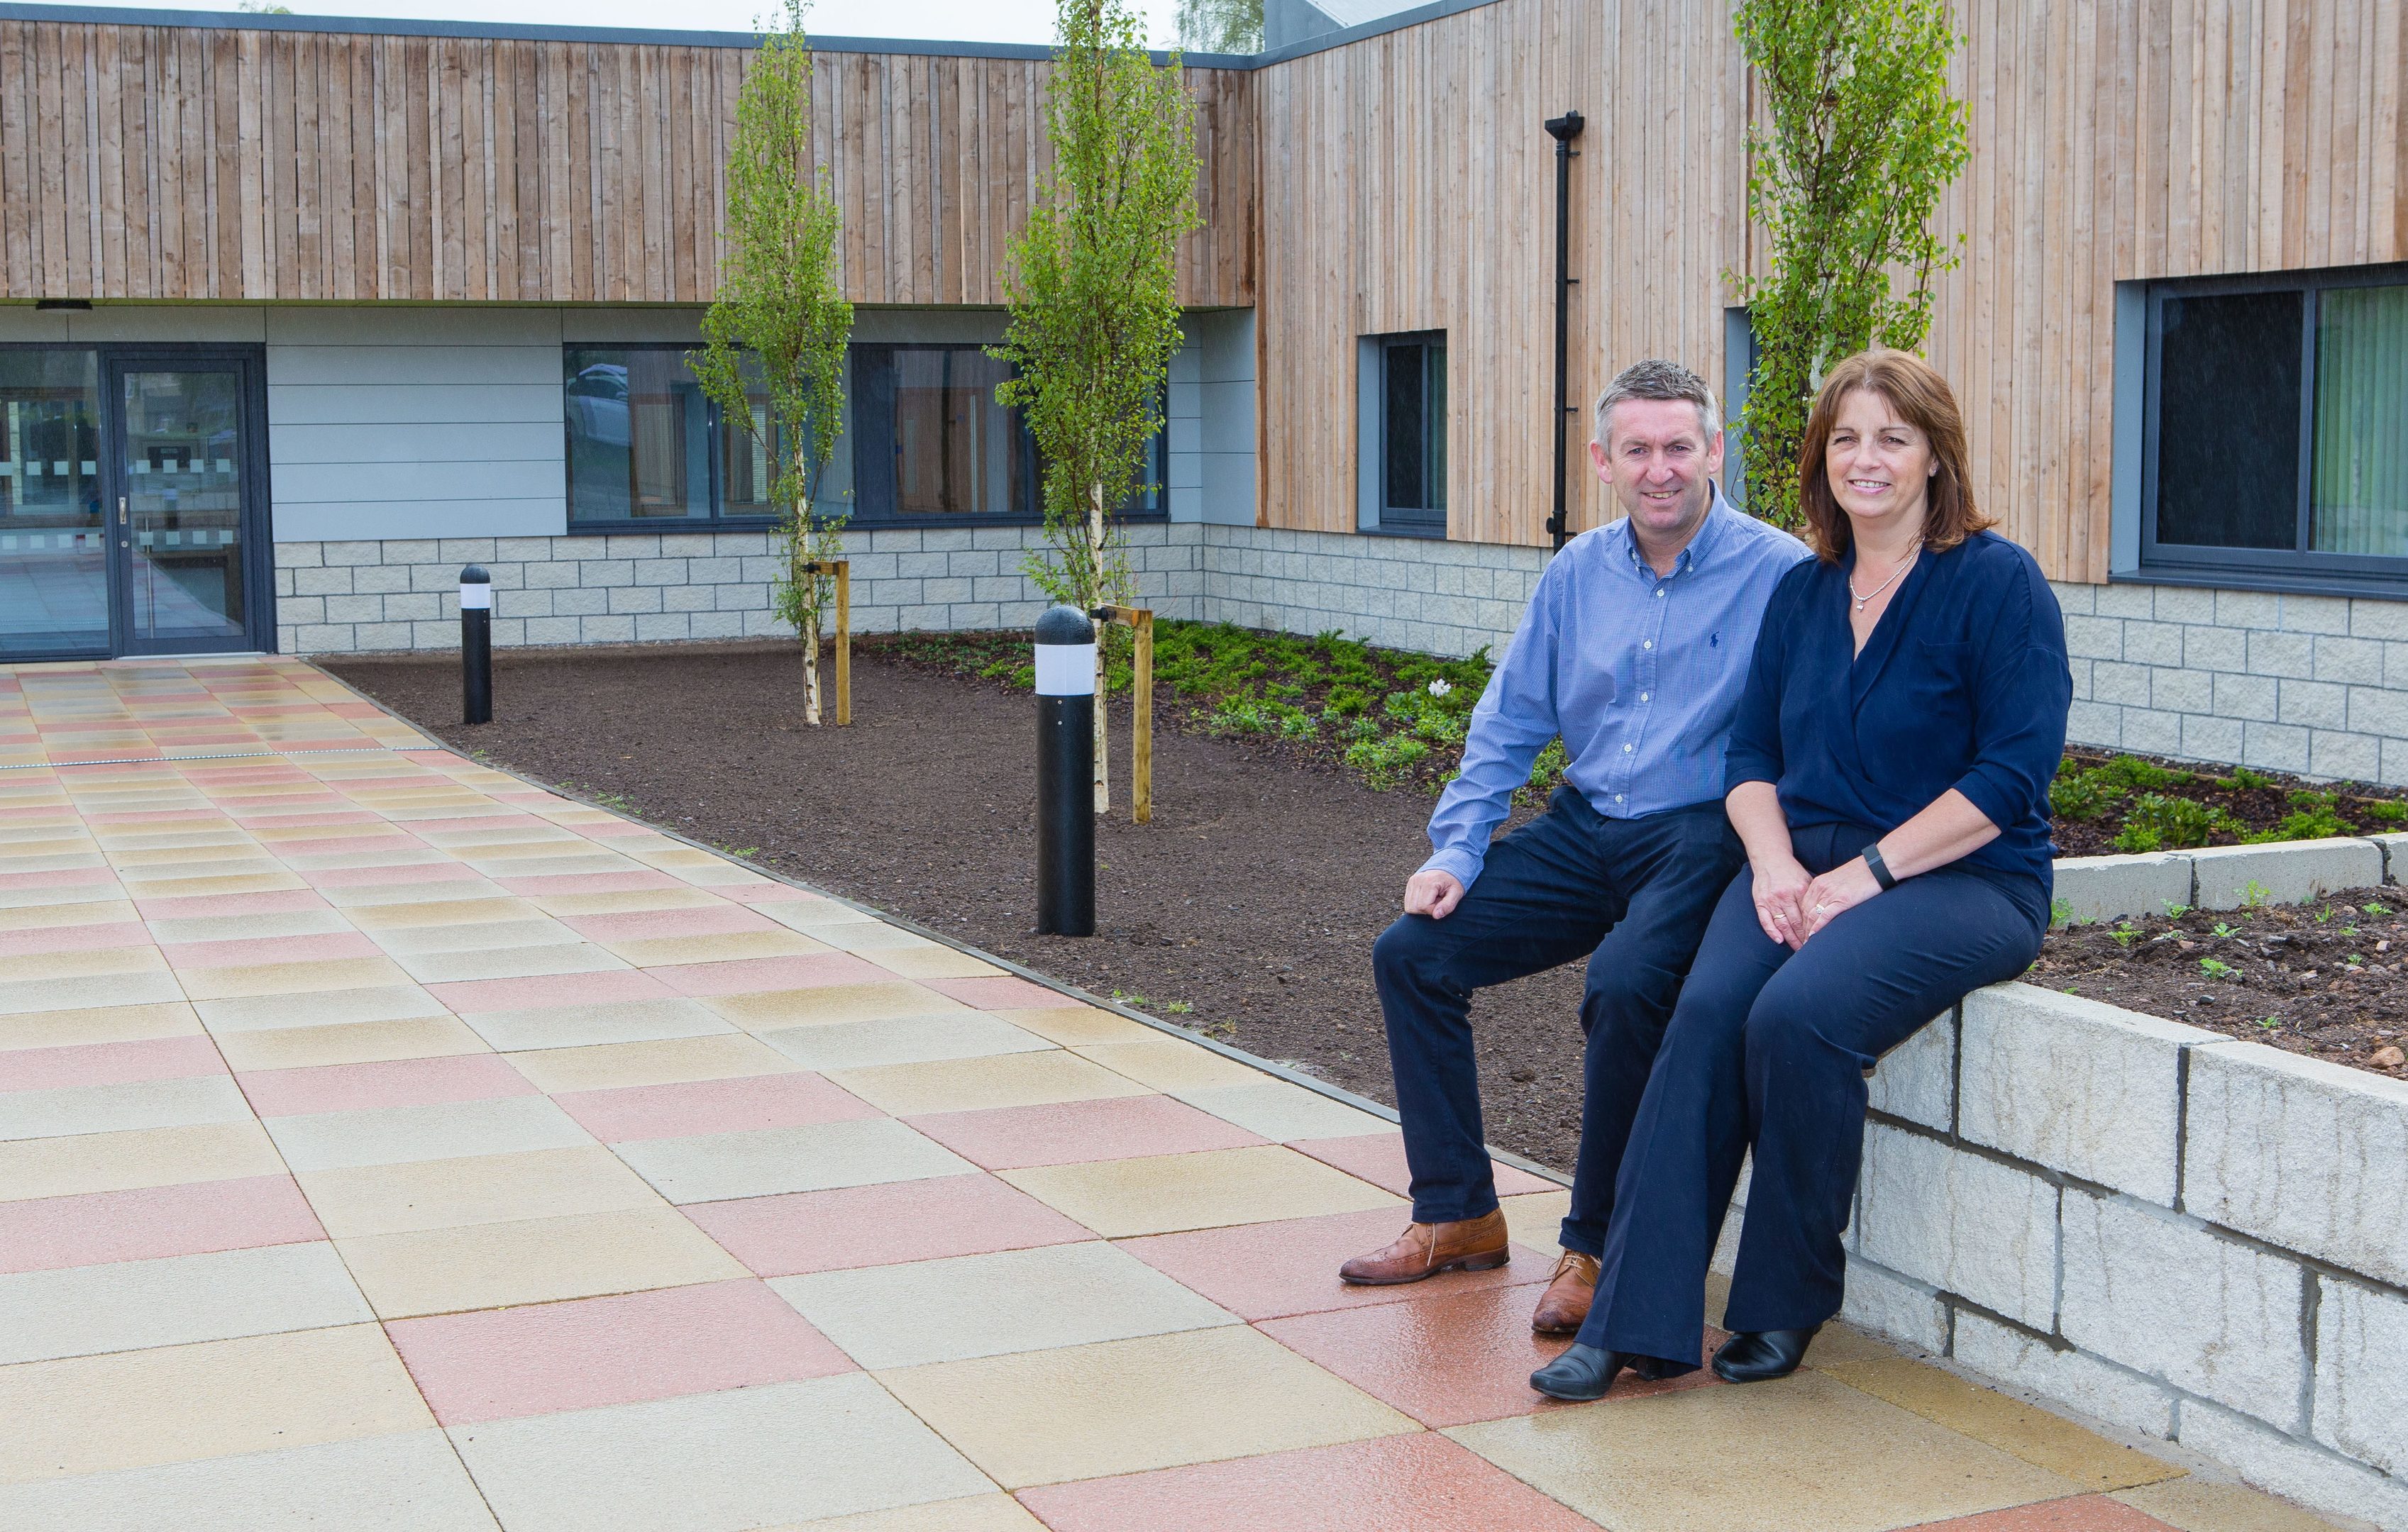 Clinical Service manager Lesley Tweedie and Head of Estates, Project Director Alan Lawson outside the new Intensive Psychiatric Care Unit at Stratheden Hospital.